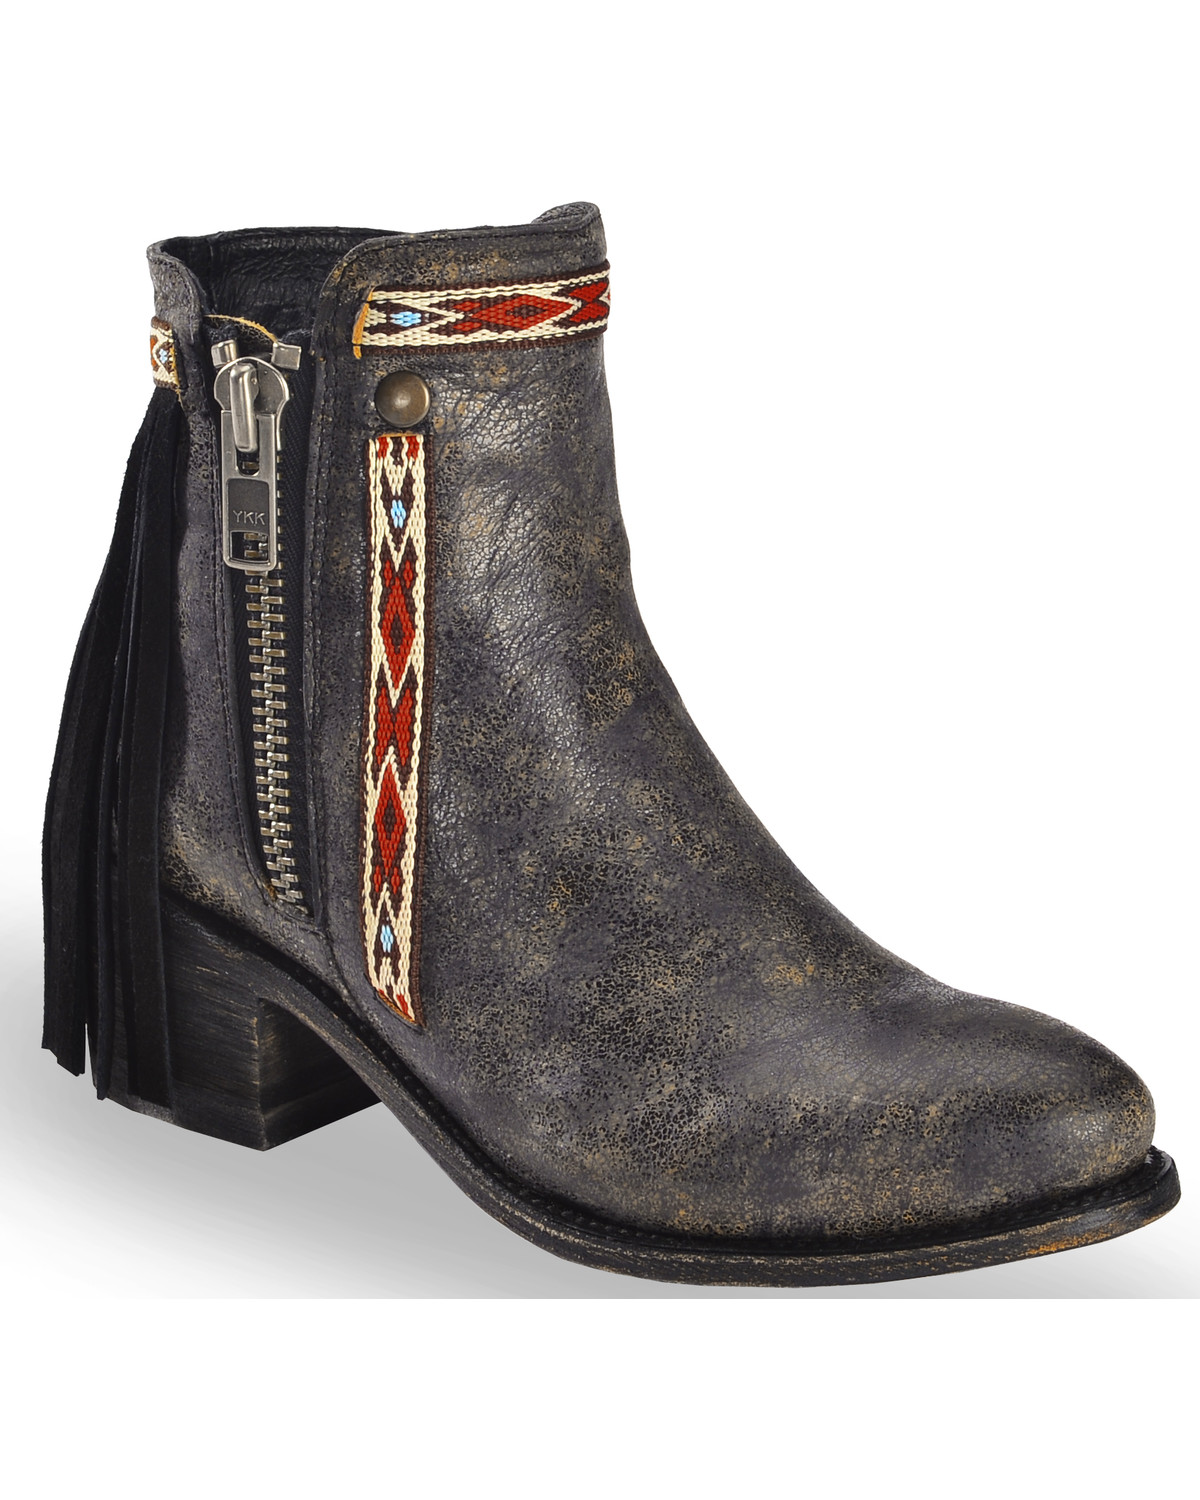 Corral Women/'s Brown Fringe Ankle Boots E1215